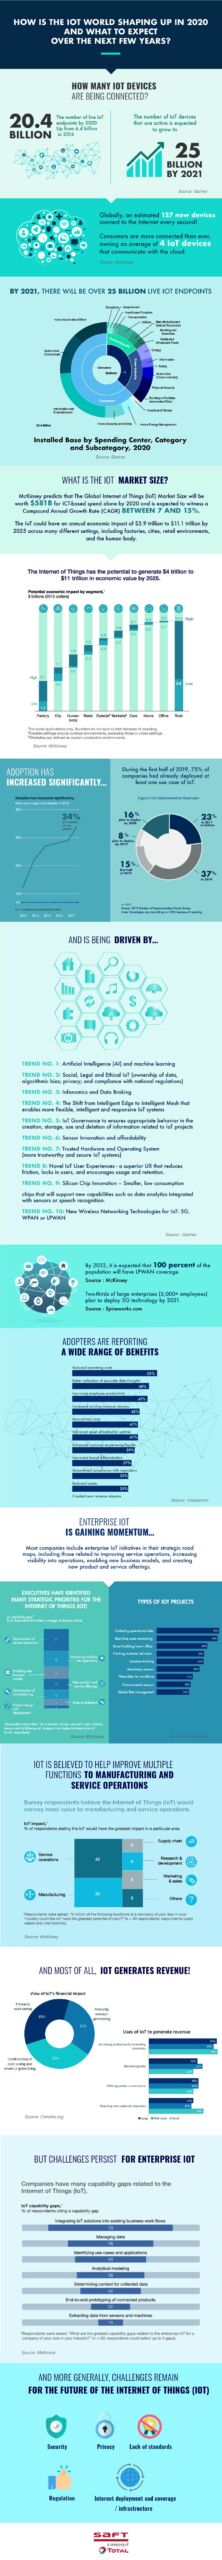 internet of things iot markt infographic 2020